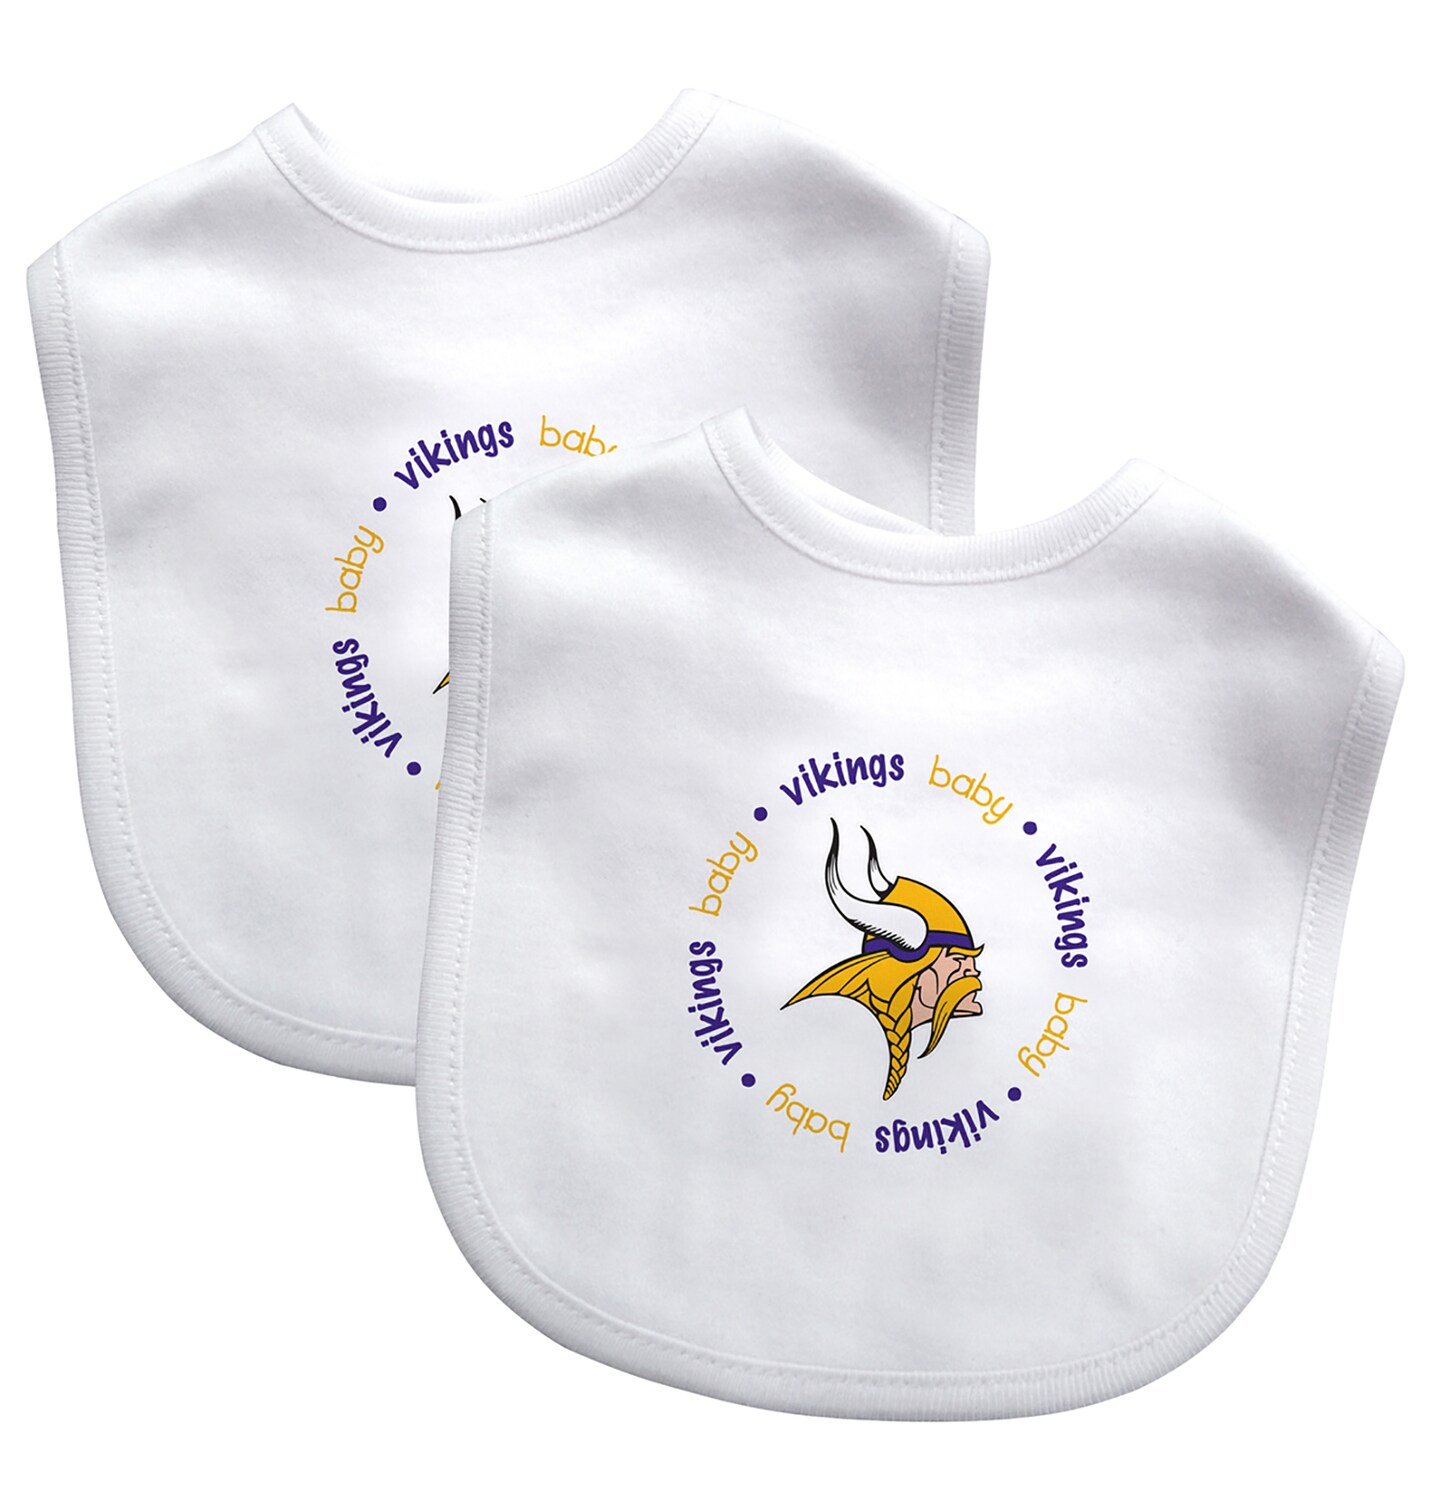 Baby Fanatic Officially Licensed Unisex Baby Bibs 2 Pack - NFL Minnesota  Vikings Baby Apparel Set